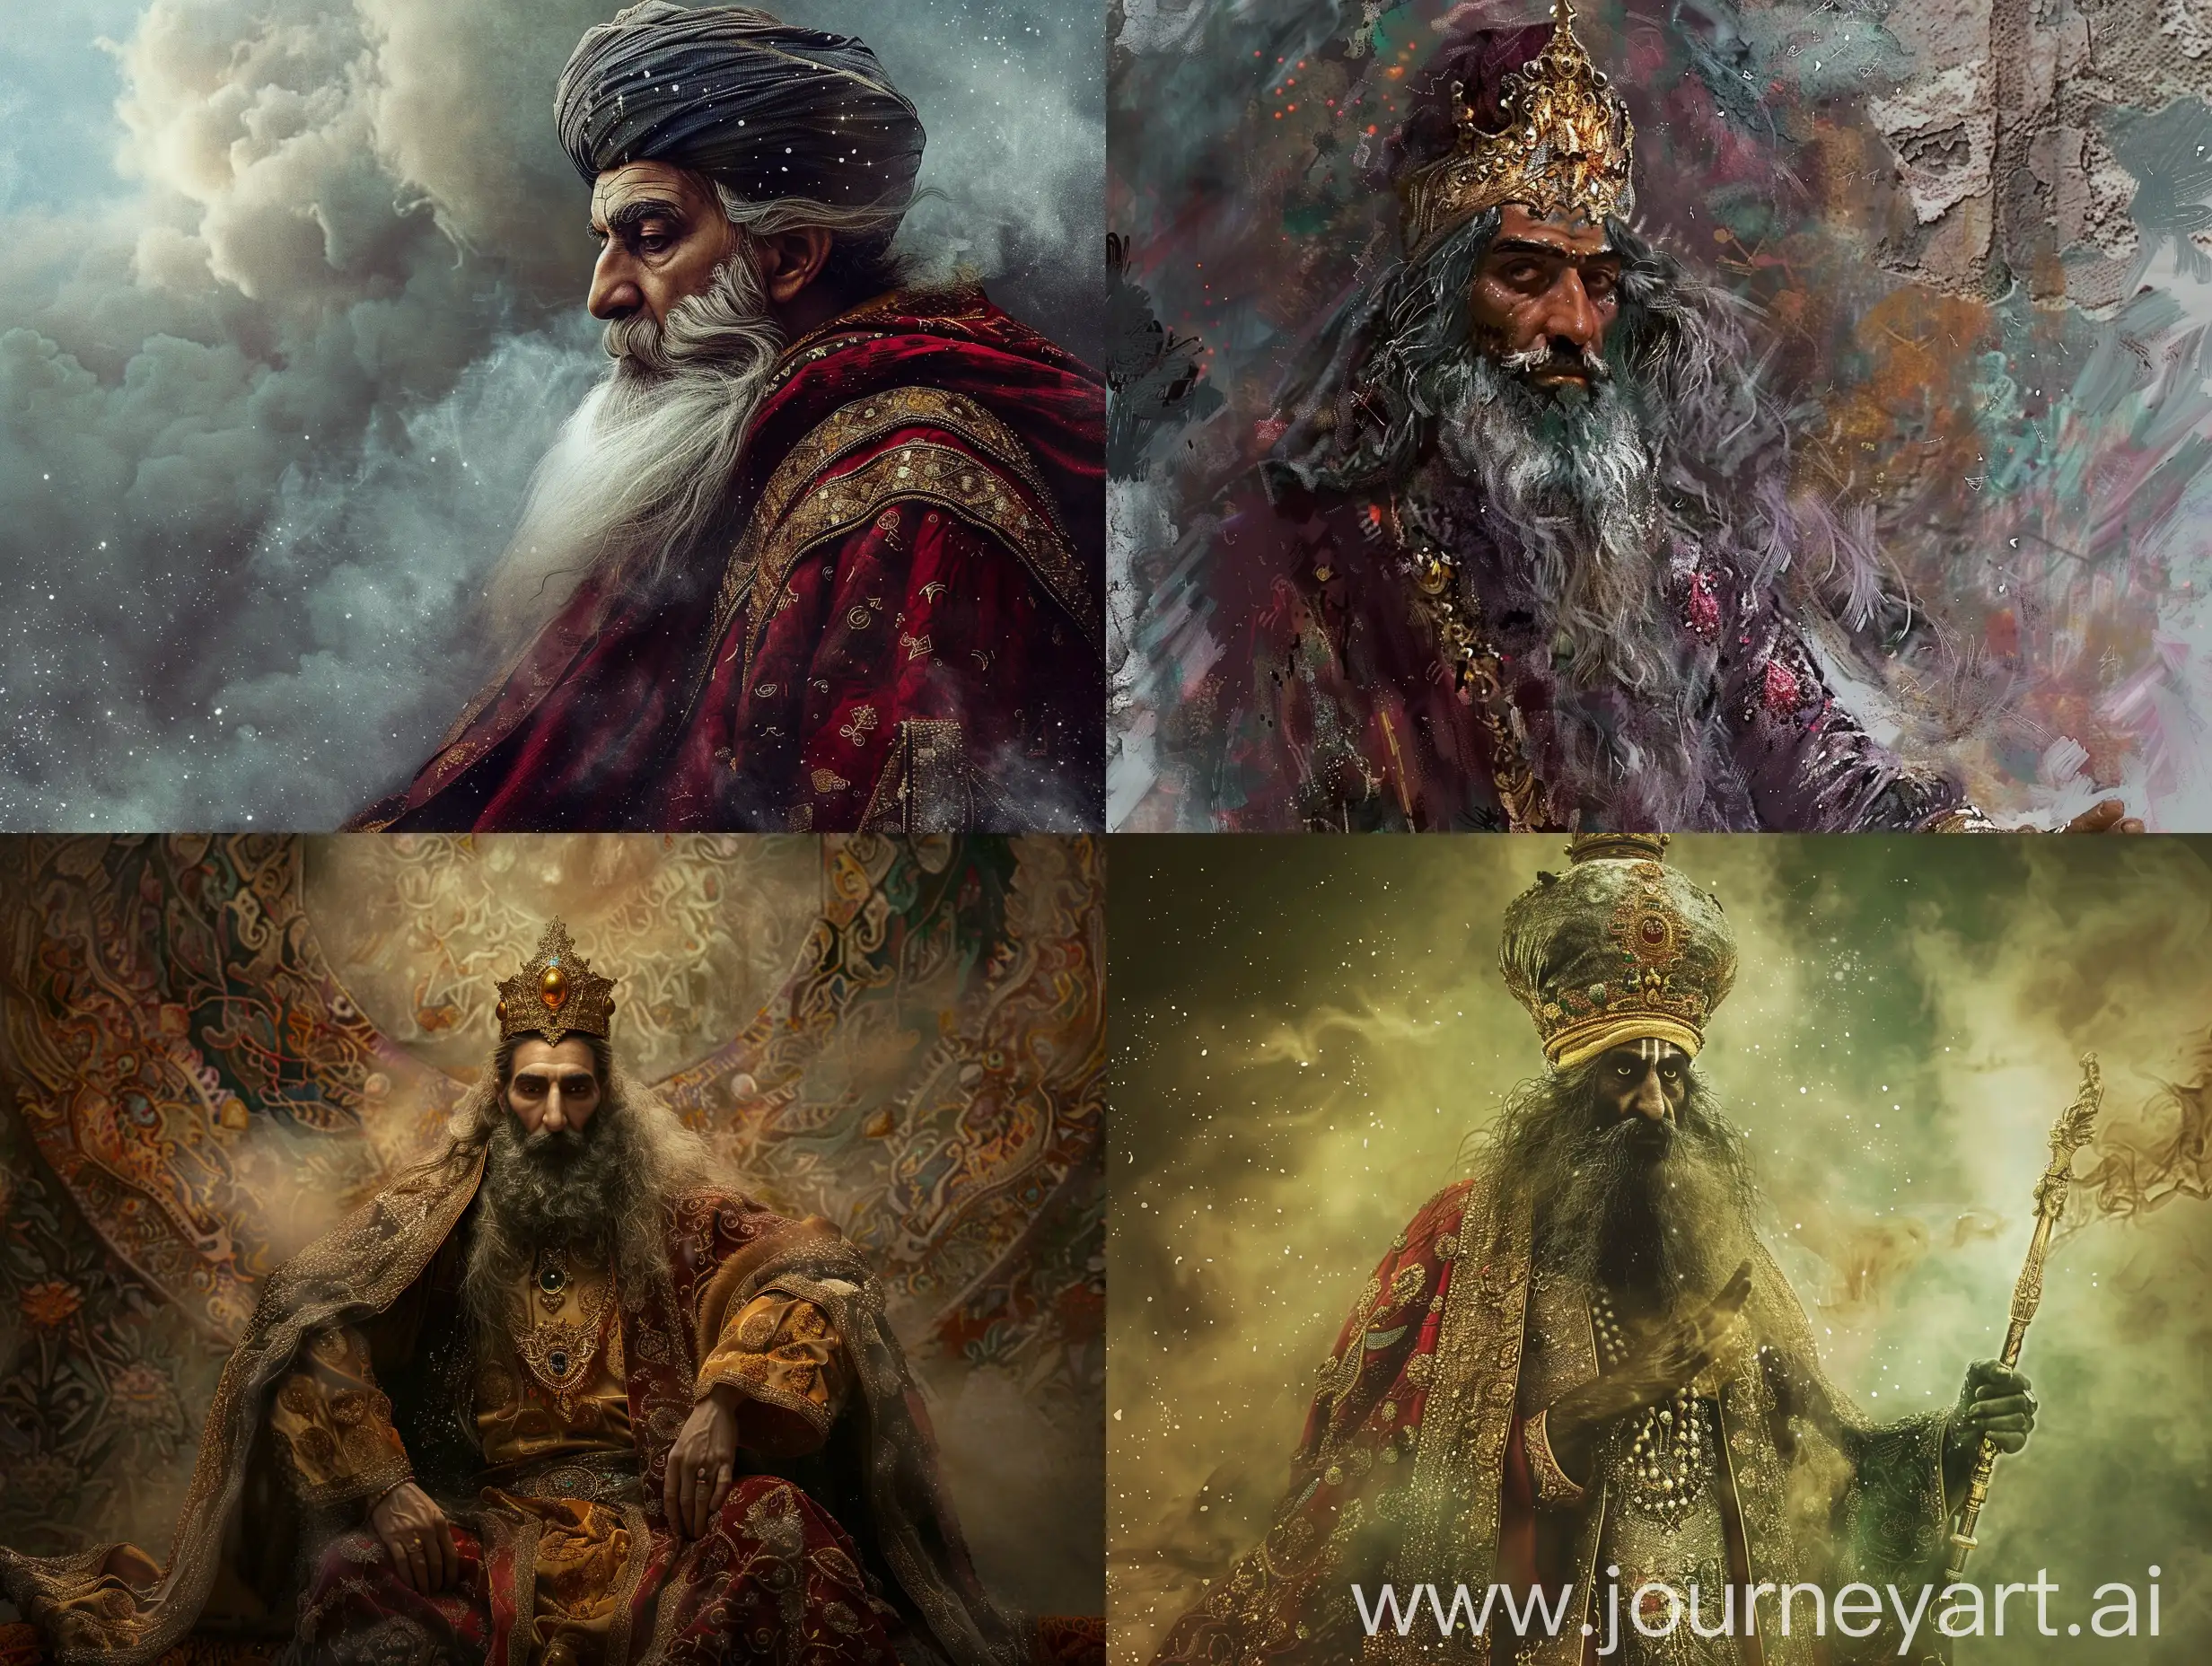 Mythical-King-Jamshid-in-a-Fantasy-Magical-Realm